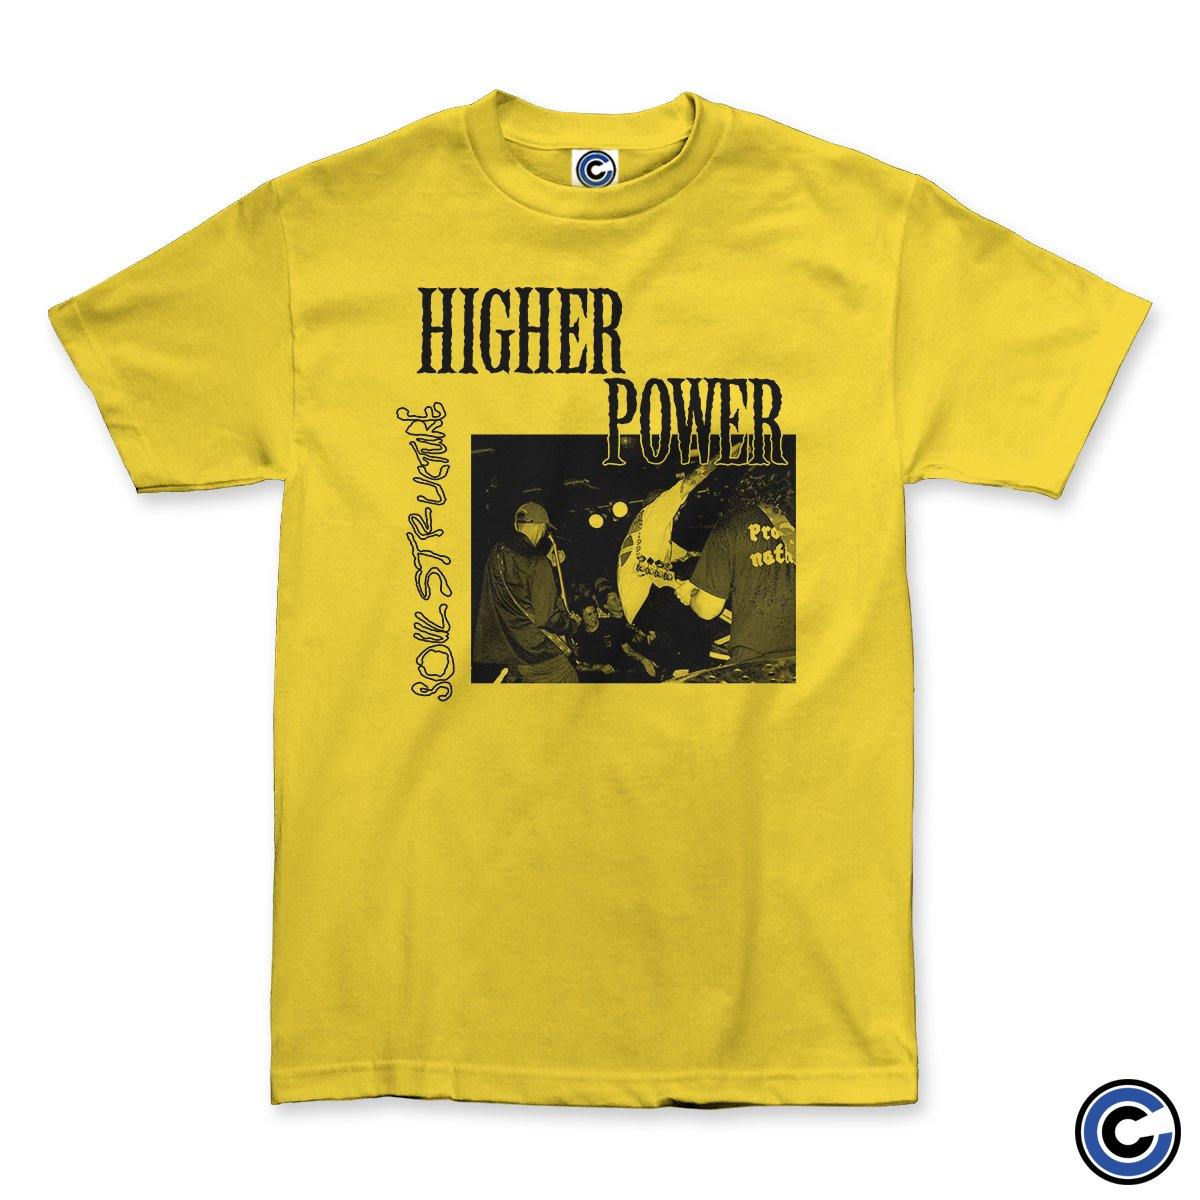 Buy – Higher Power "Staggered Live" Shirt – Band & Music Merch – Cold Cuts Merch